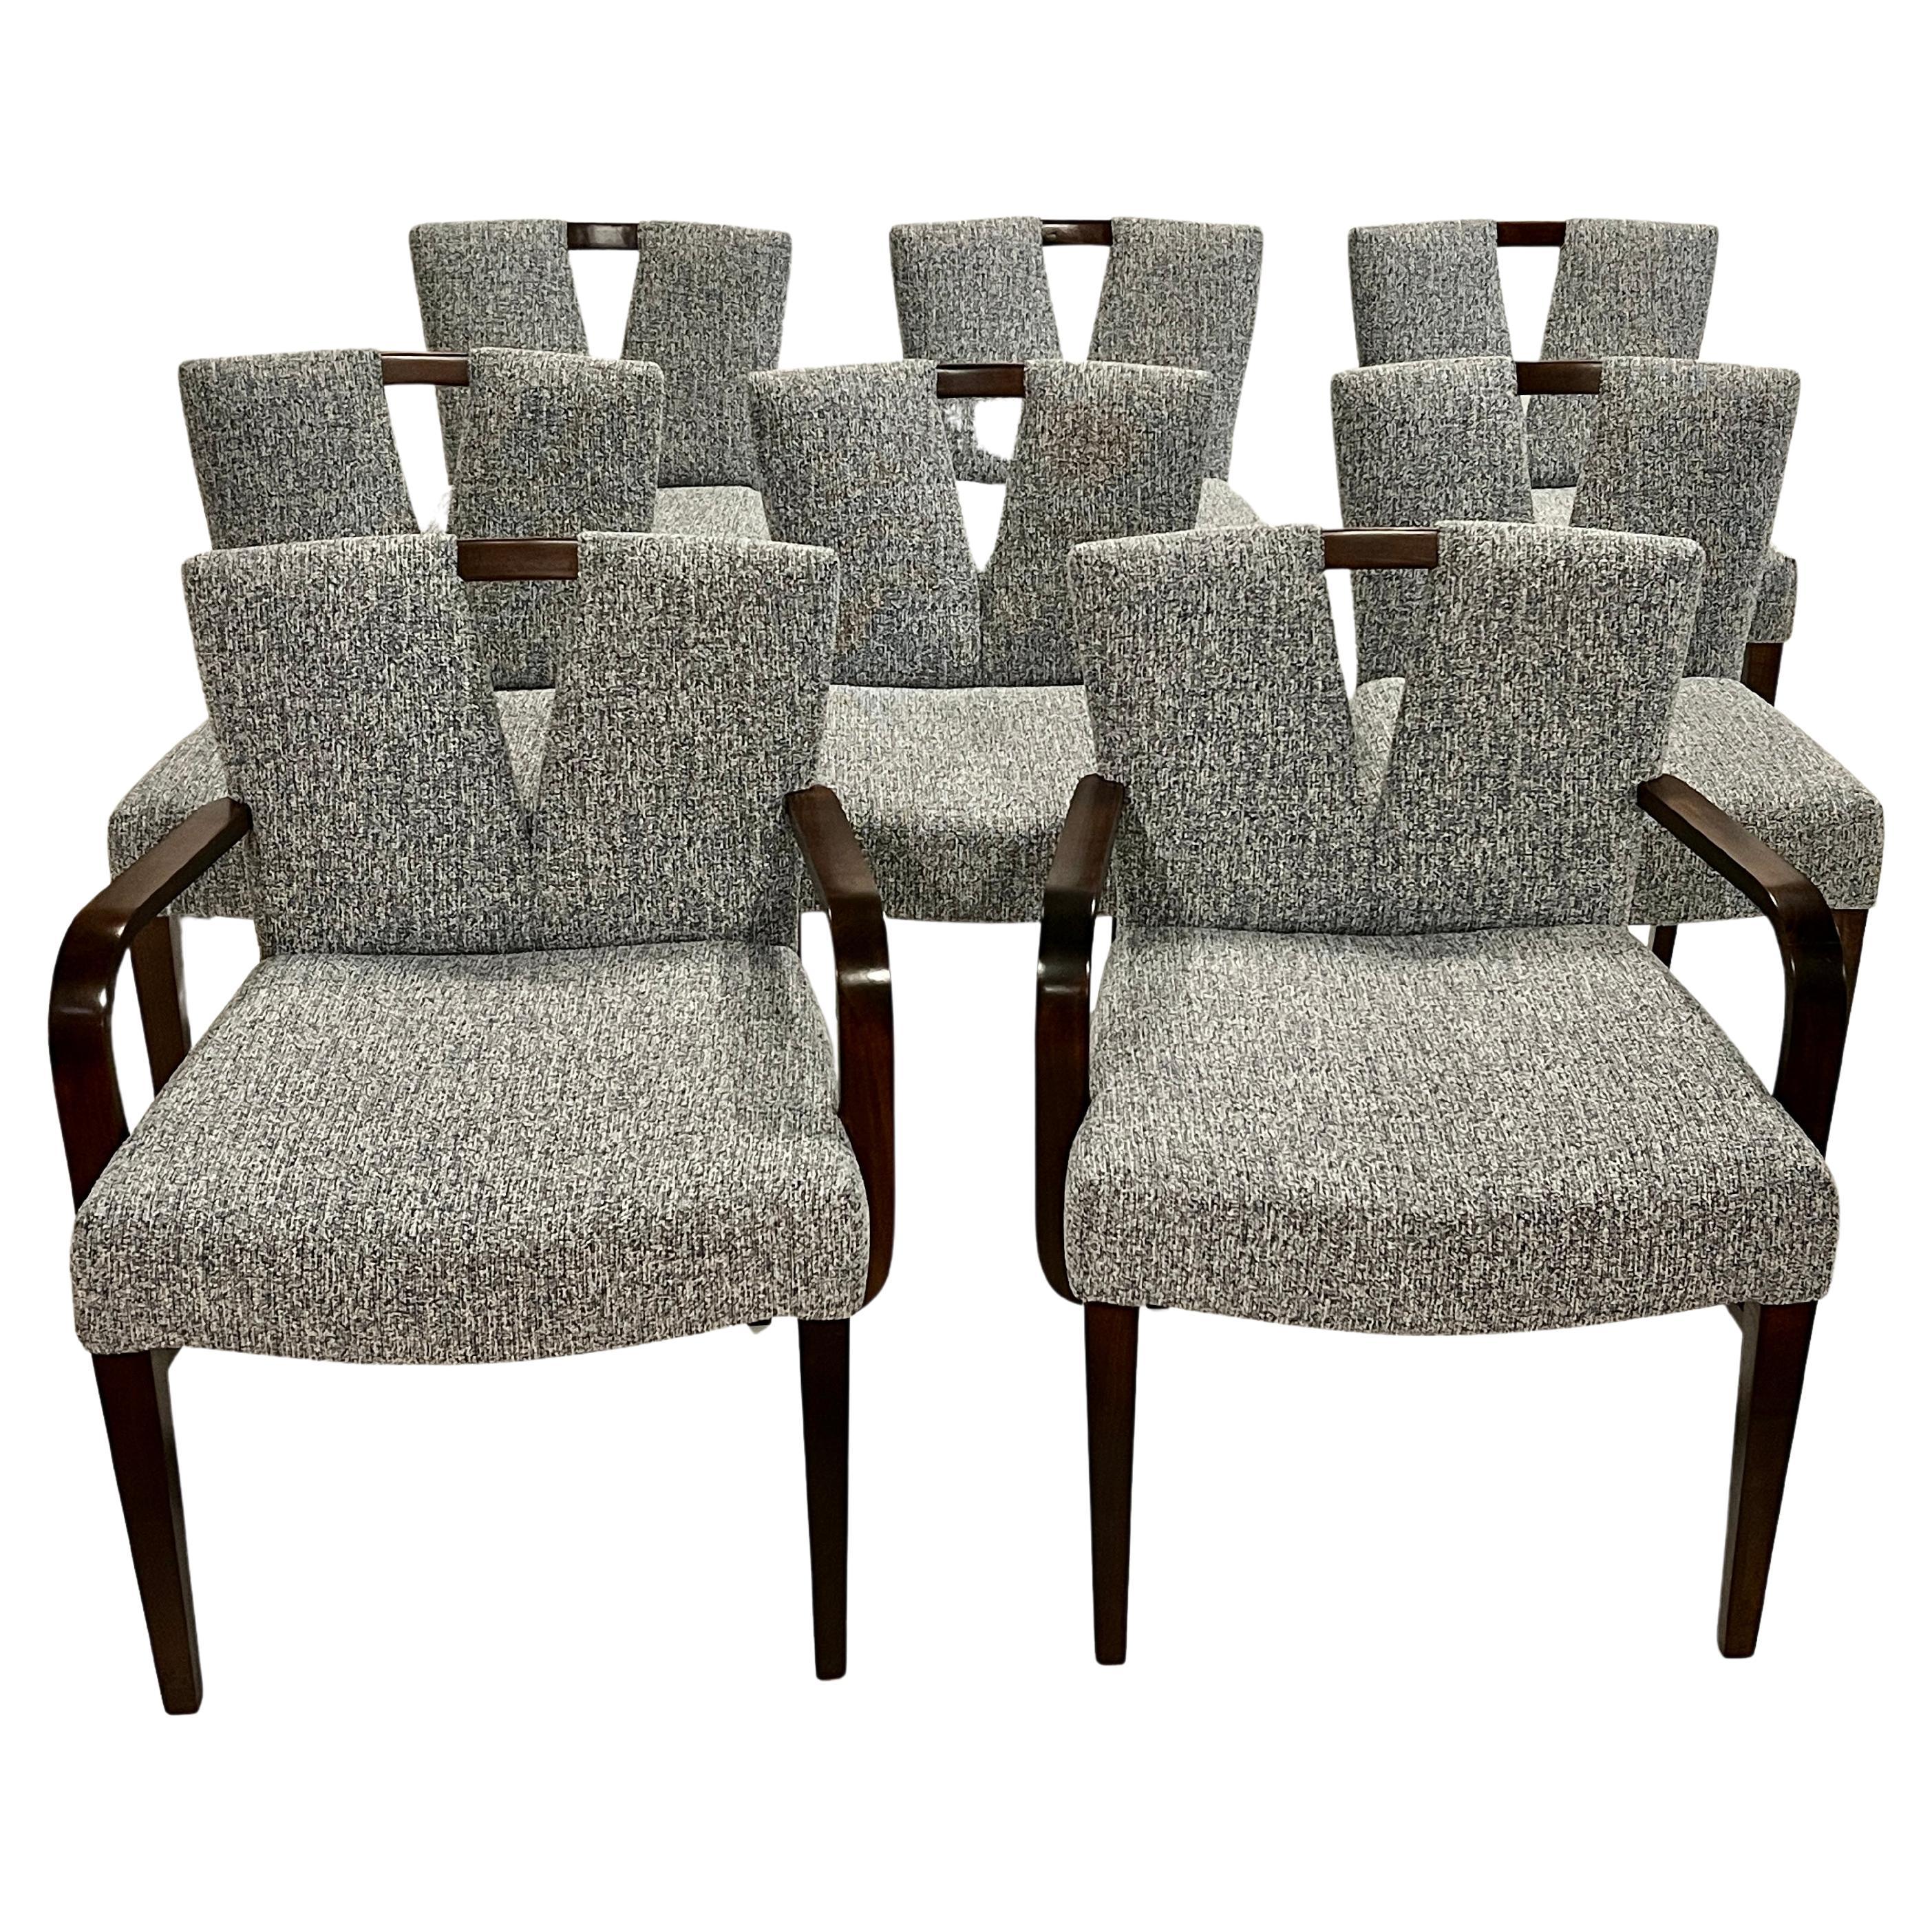 Paul Frankl Corset Dining Chairs for Johnson, Set of 8 For Sale